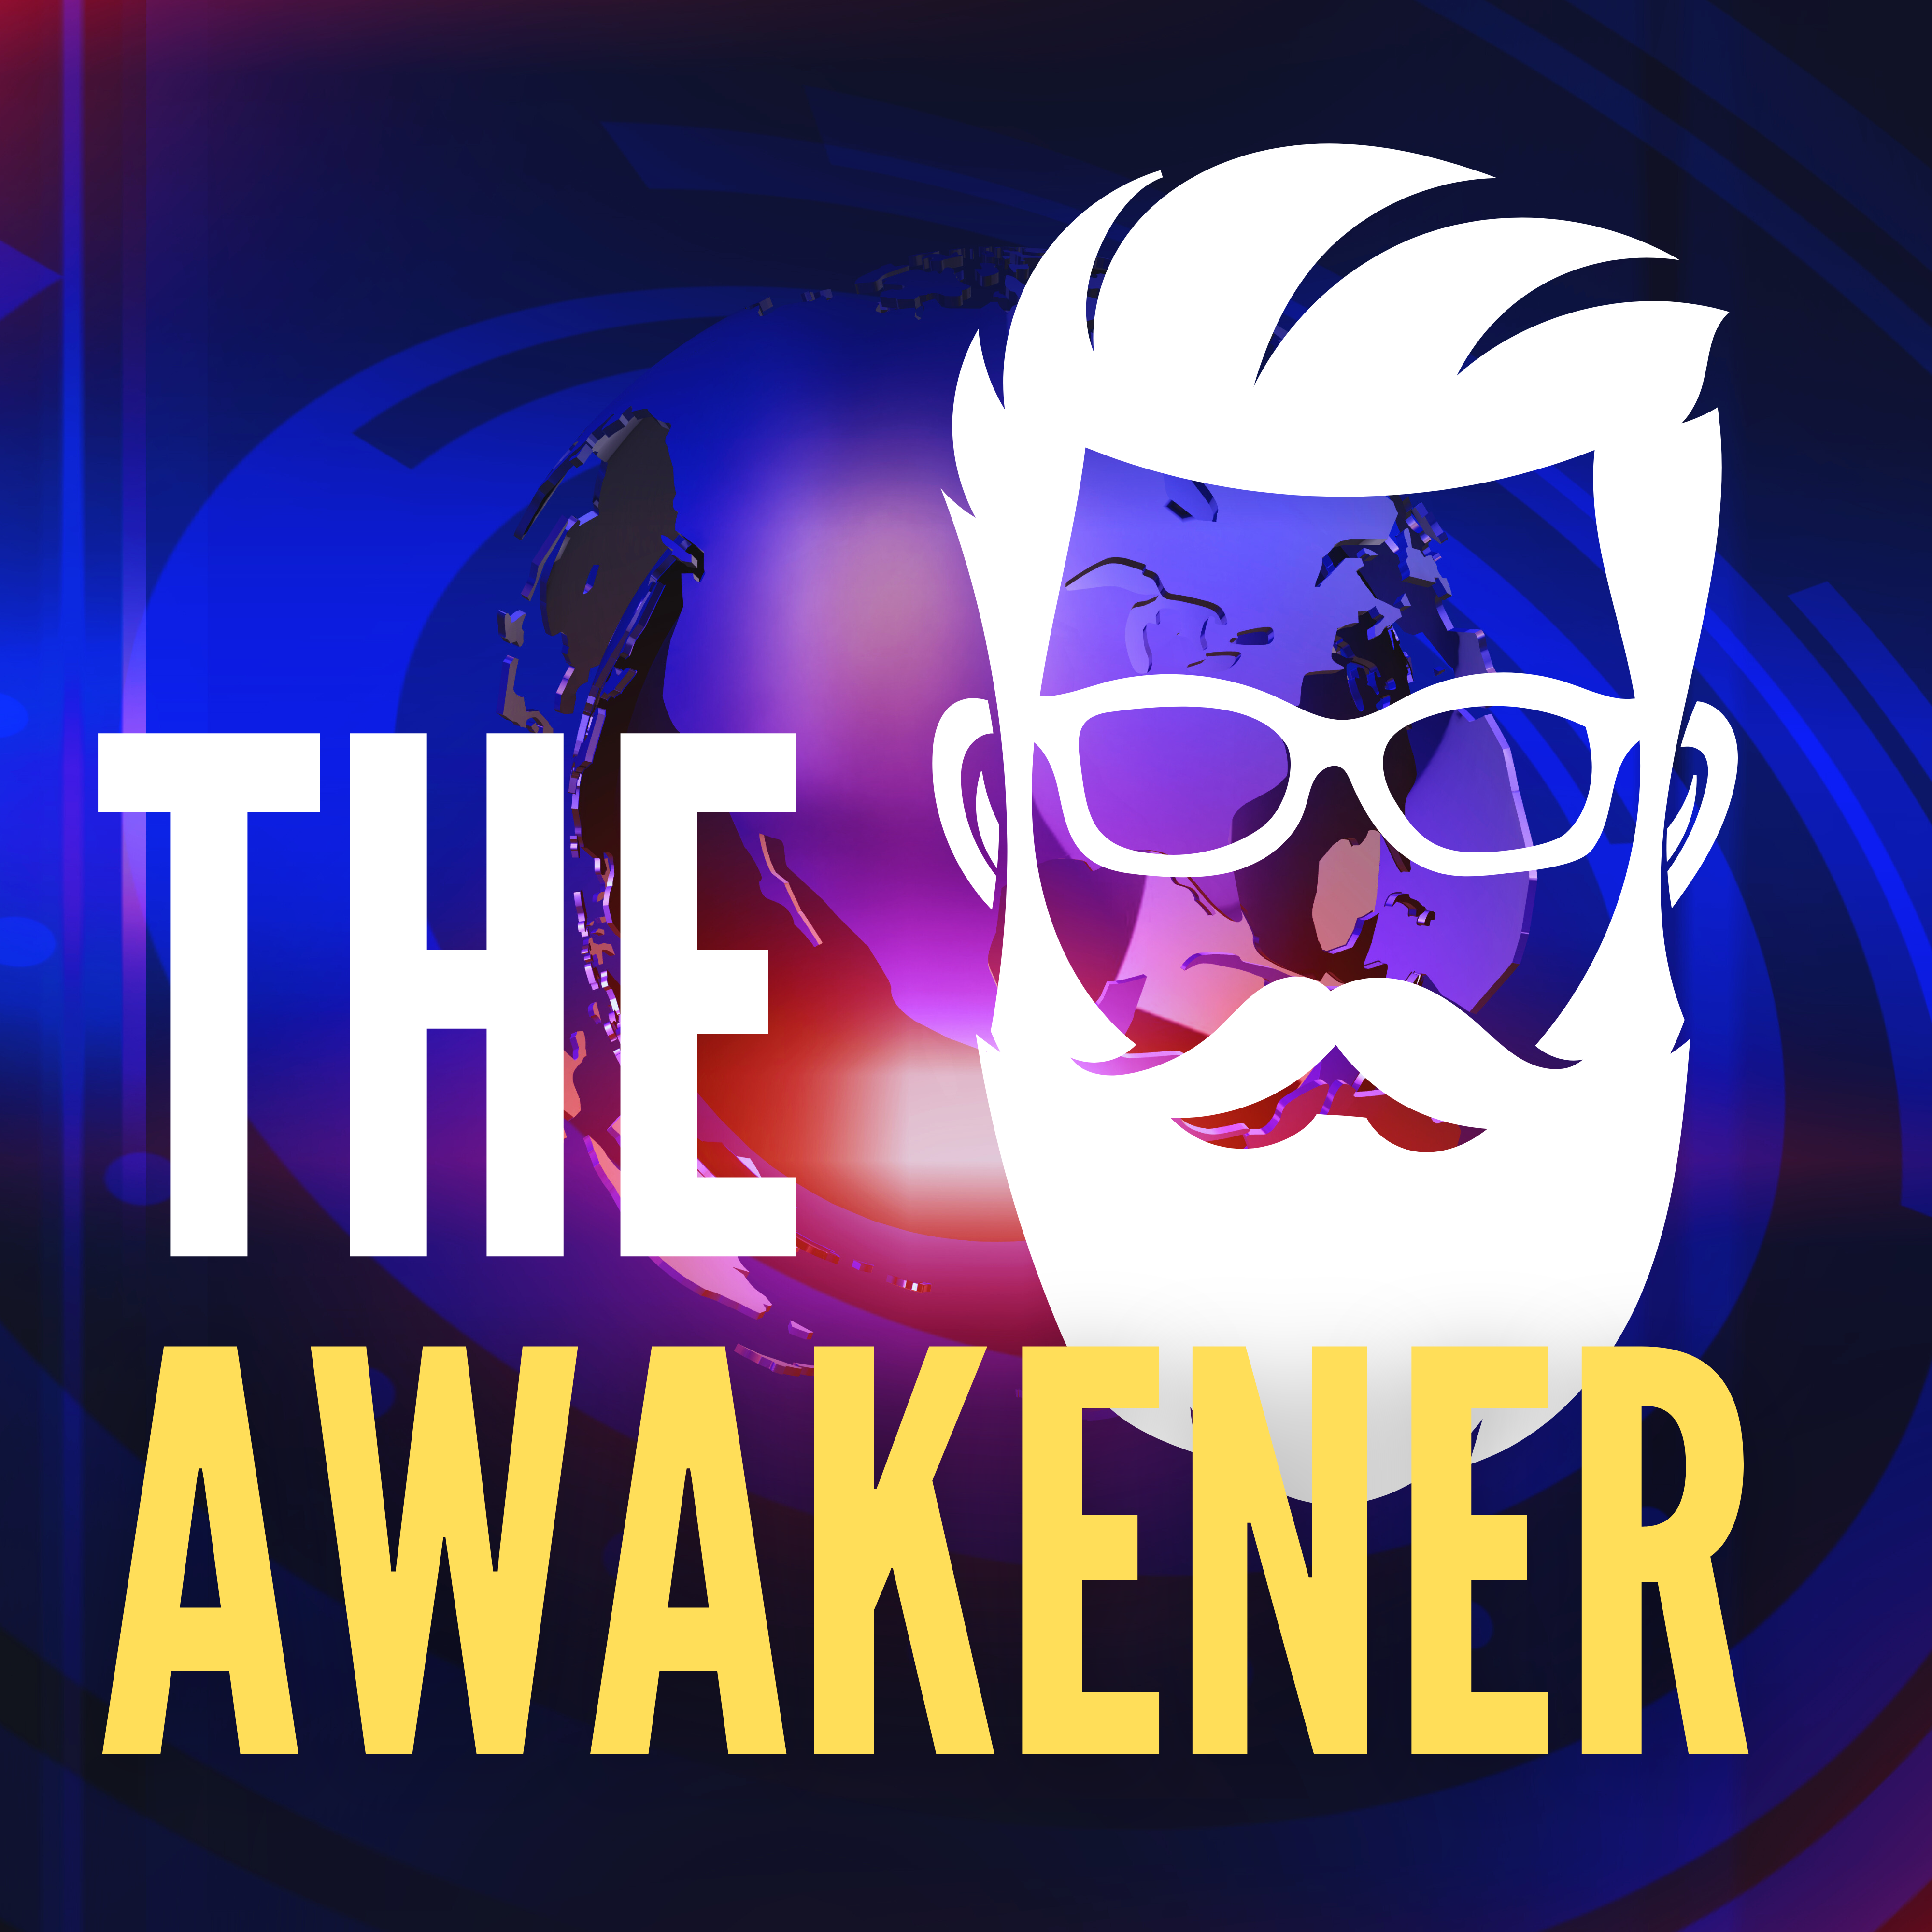 AWAKENER Episode 3   Producer, DoubleWide has questions about China, Russia and The FBI